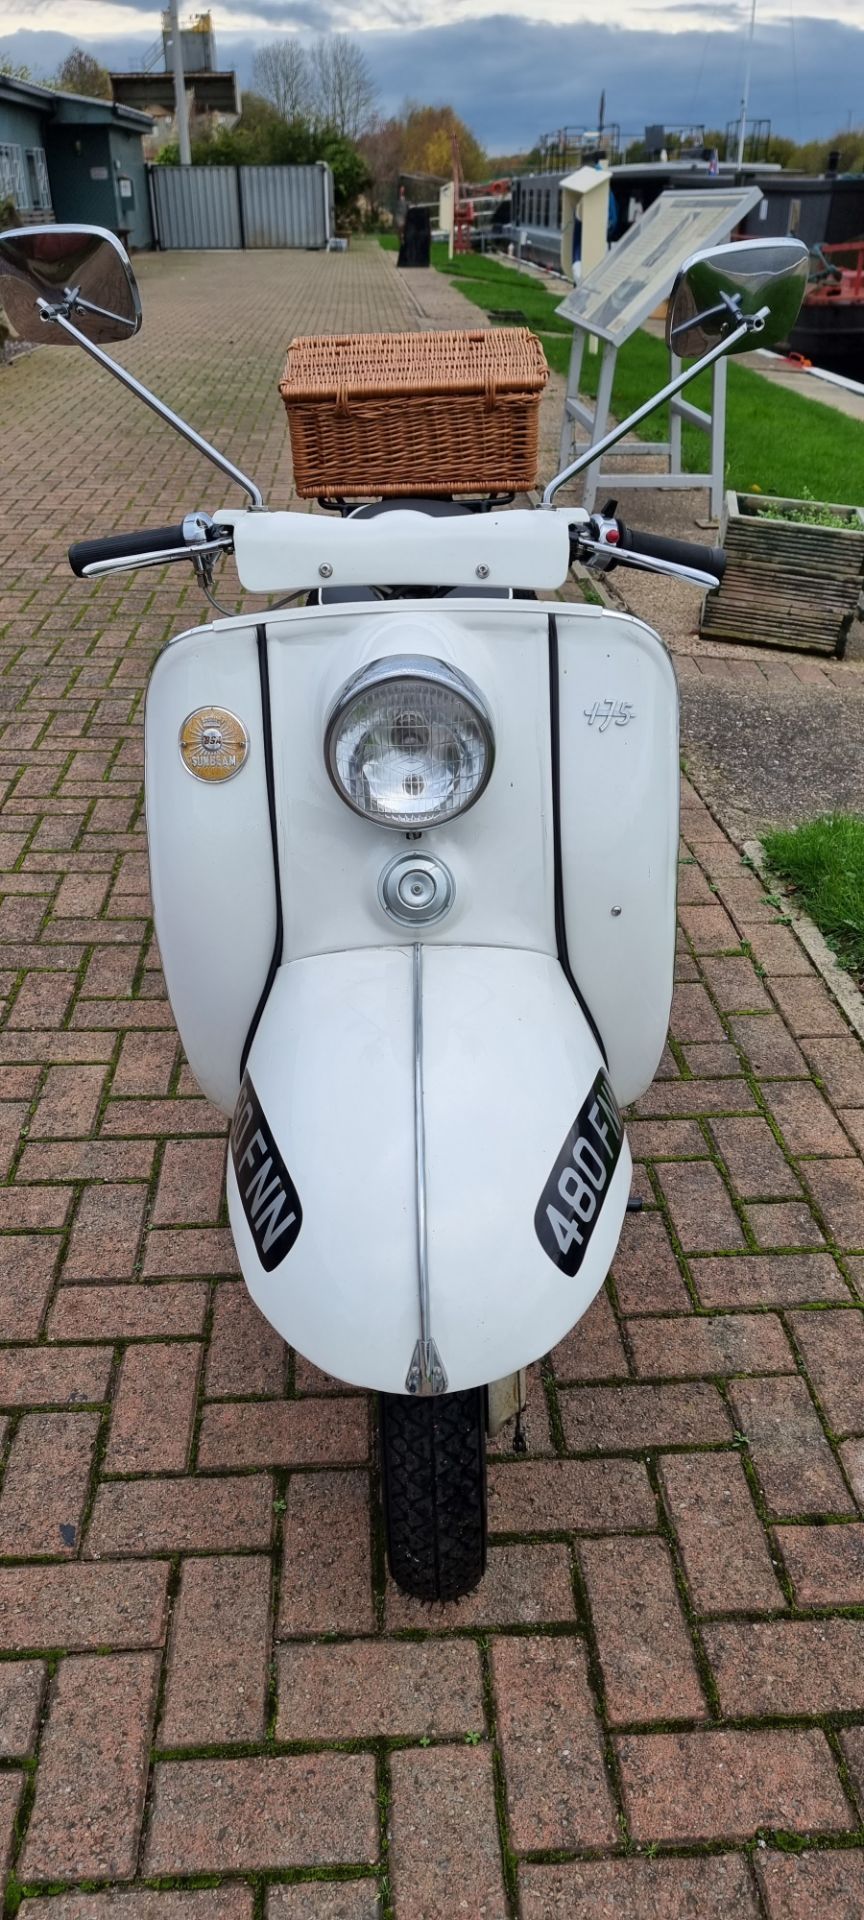 1960 BSA Sunbeam Scooter 175cc. Registration number 480 FNN (non transferrable). Frame number 9306B. - Image 3 of 10